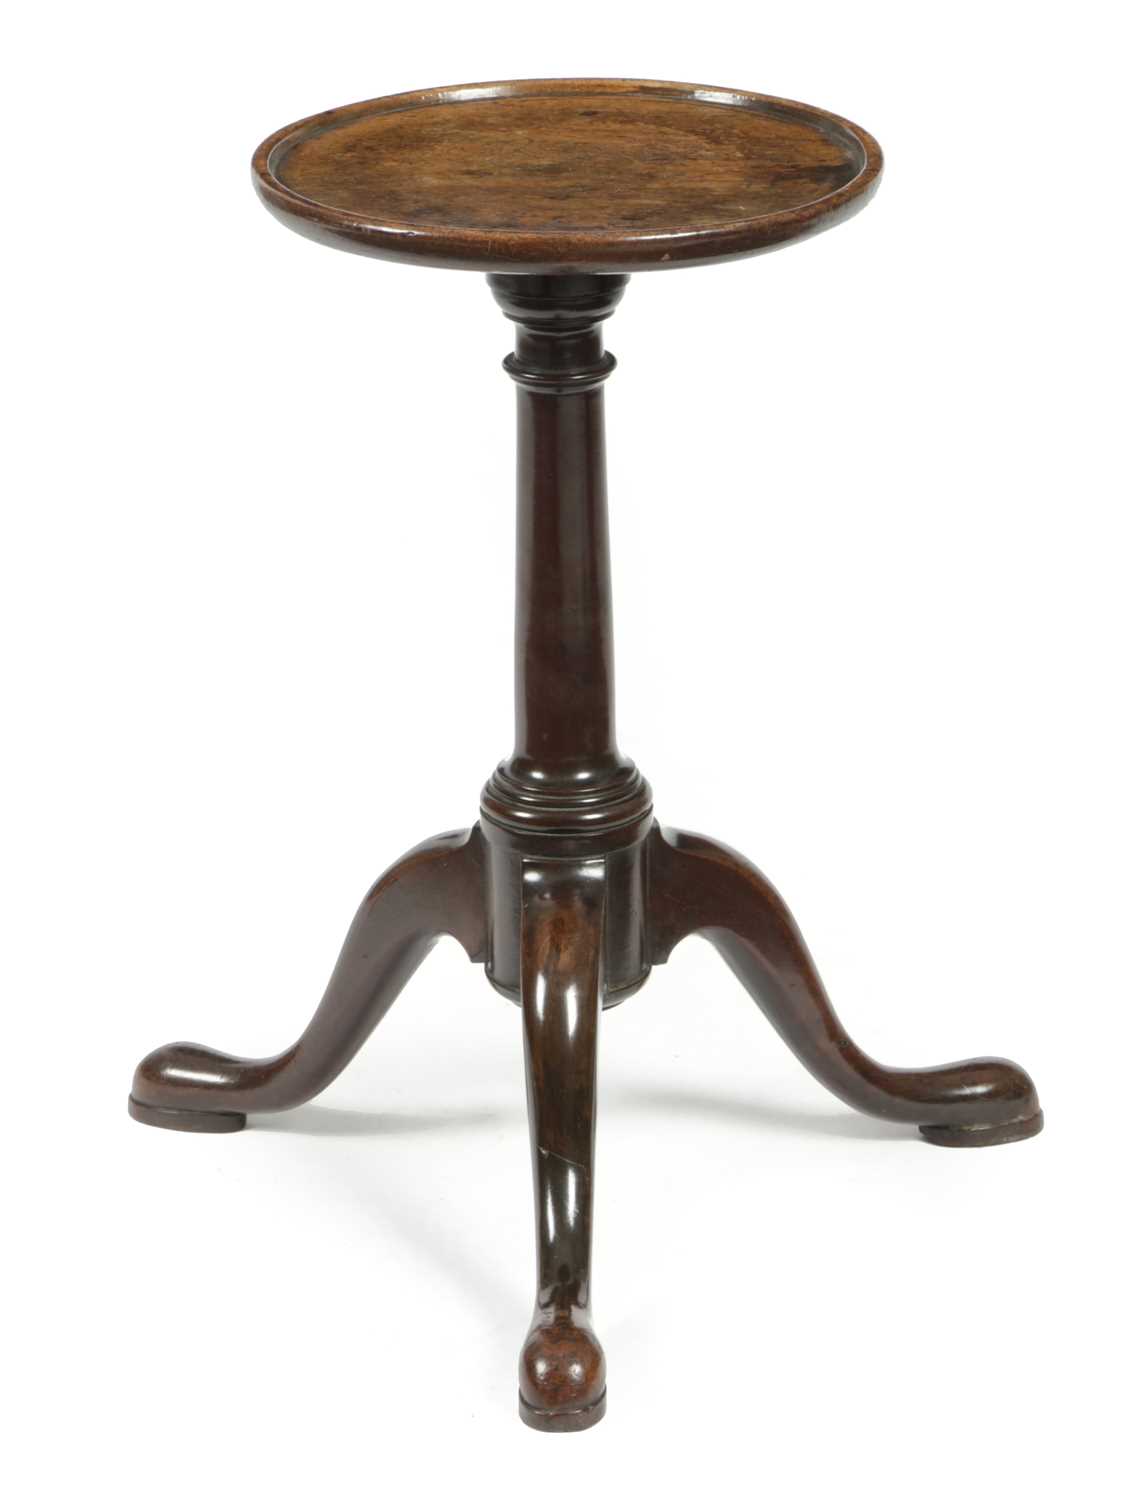 A GEORGE II MAHOGANY KETTLE STANDC.1740, TOP AND BASE POSSIBLY ASSOCIATED with a dished circular